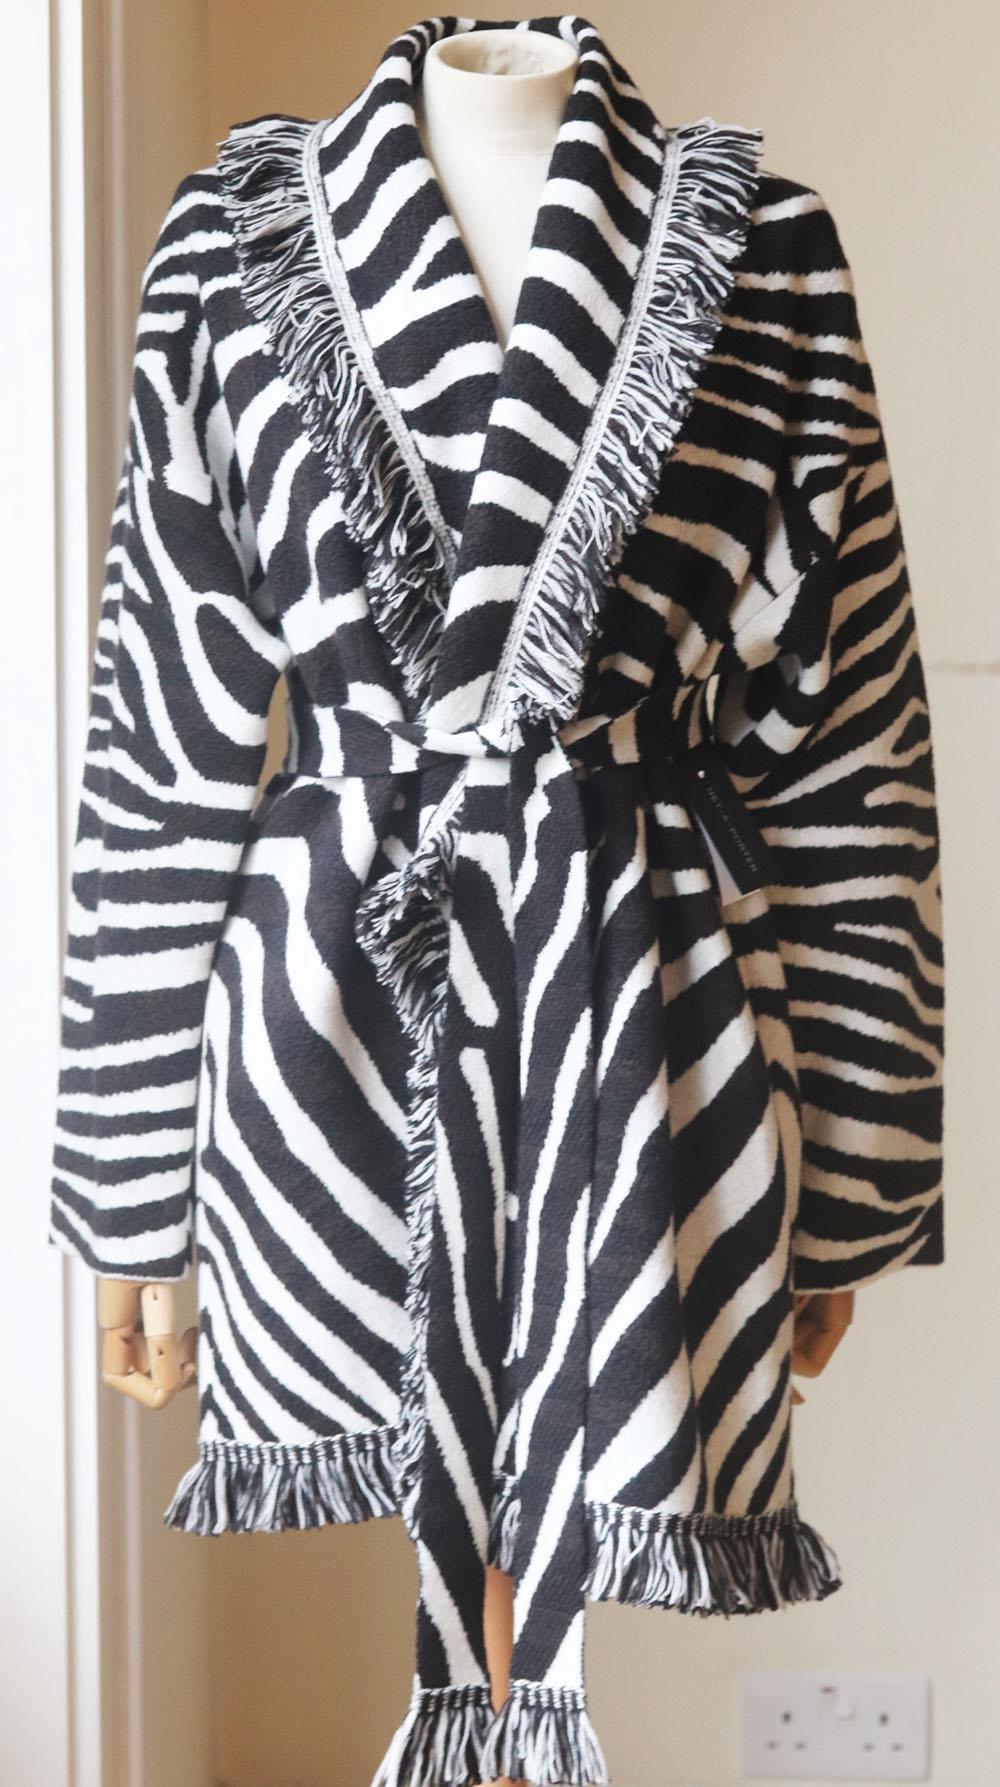 Alanui's 'Lapponia' cardigan took a total of eight hours to be knitted, plus another six for assembly and finishing, it's been made in Italy from zebra-jacquard wool and detailed with bohemian fringing. Black and white zebra-jacquard wool. Tie